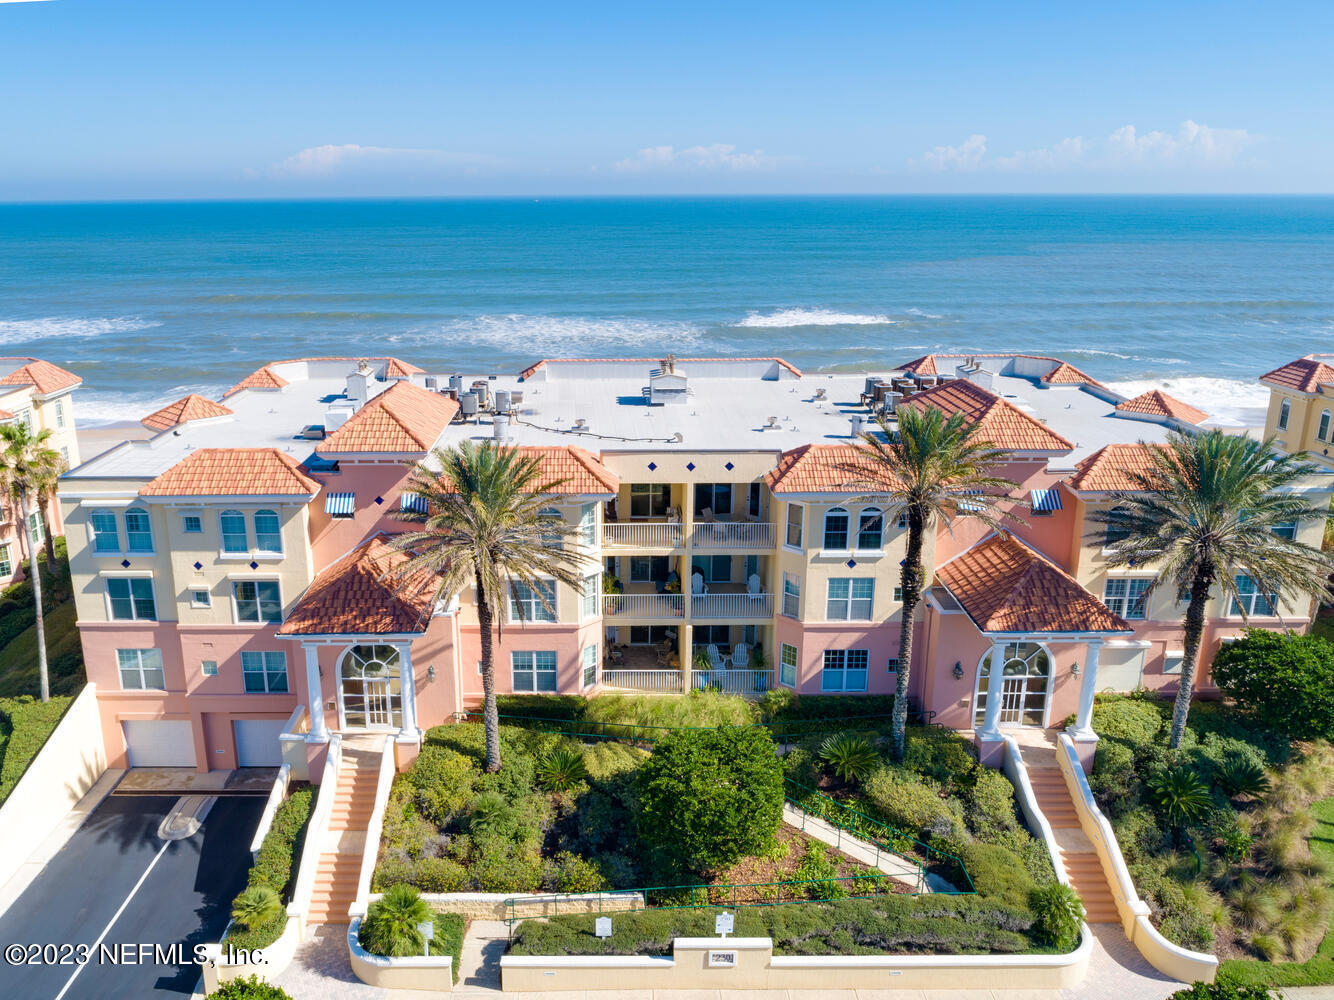 The Lodge and Club at Ponte Vedra Beach is one of the best places to stay  in St. Augustine